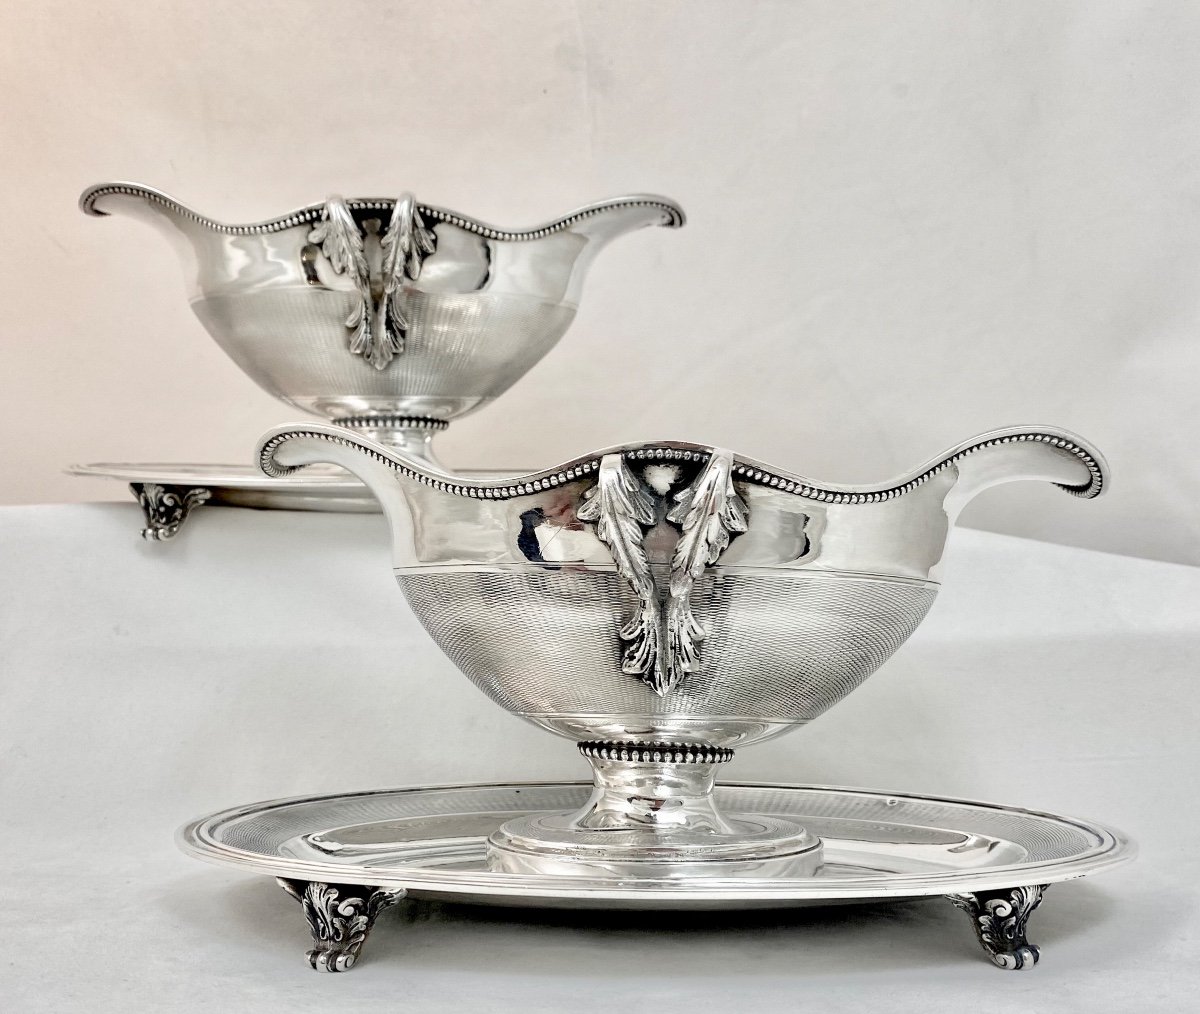 Pair Of Sauce Boats, King Farouk I Of Egypt, Veyrat, Paris 1870, Sterling Silver-photo-2